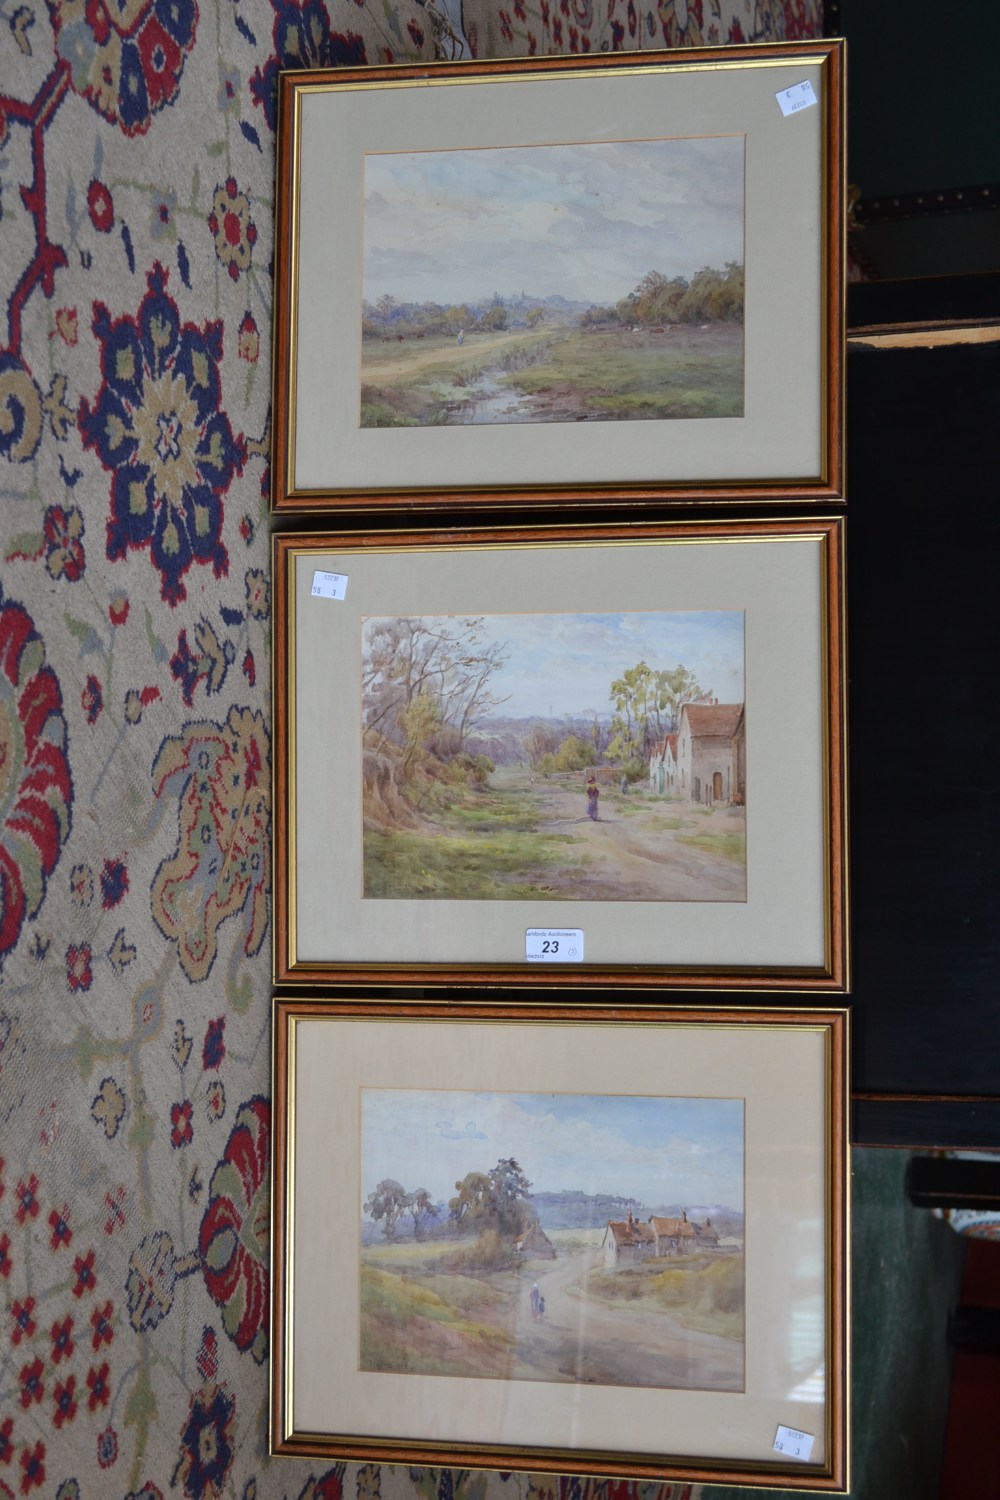 Harry Peach
A set of three Derbyshire scenes
signed,